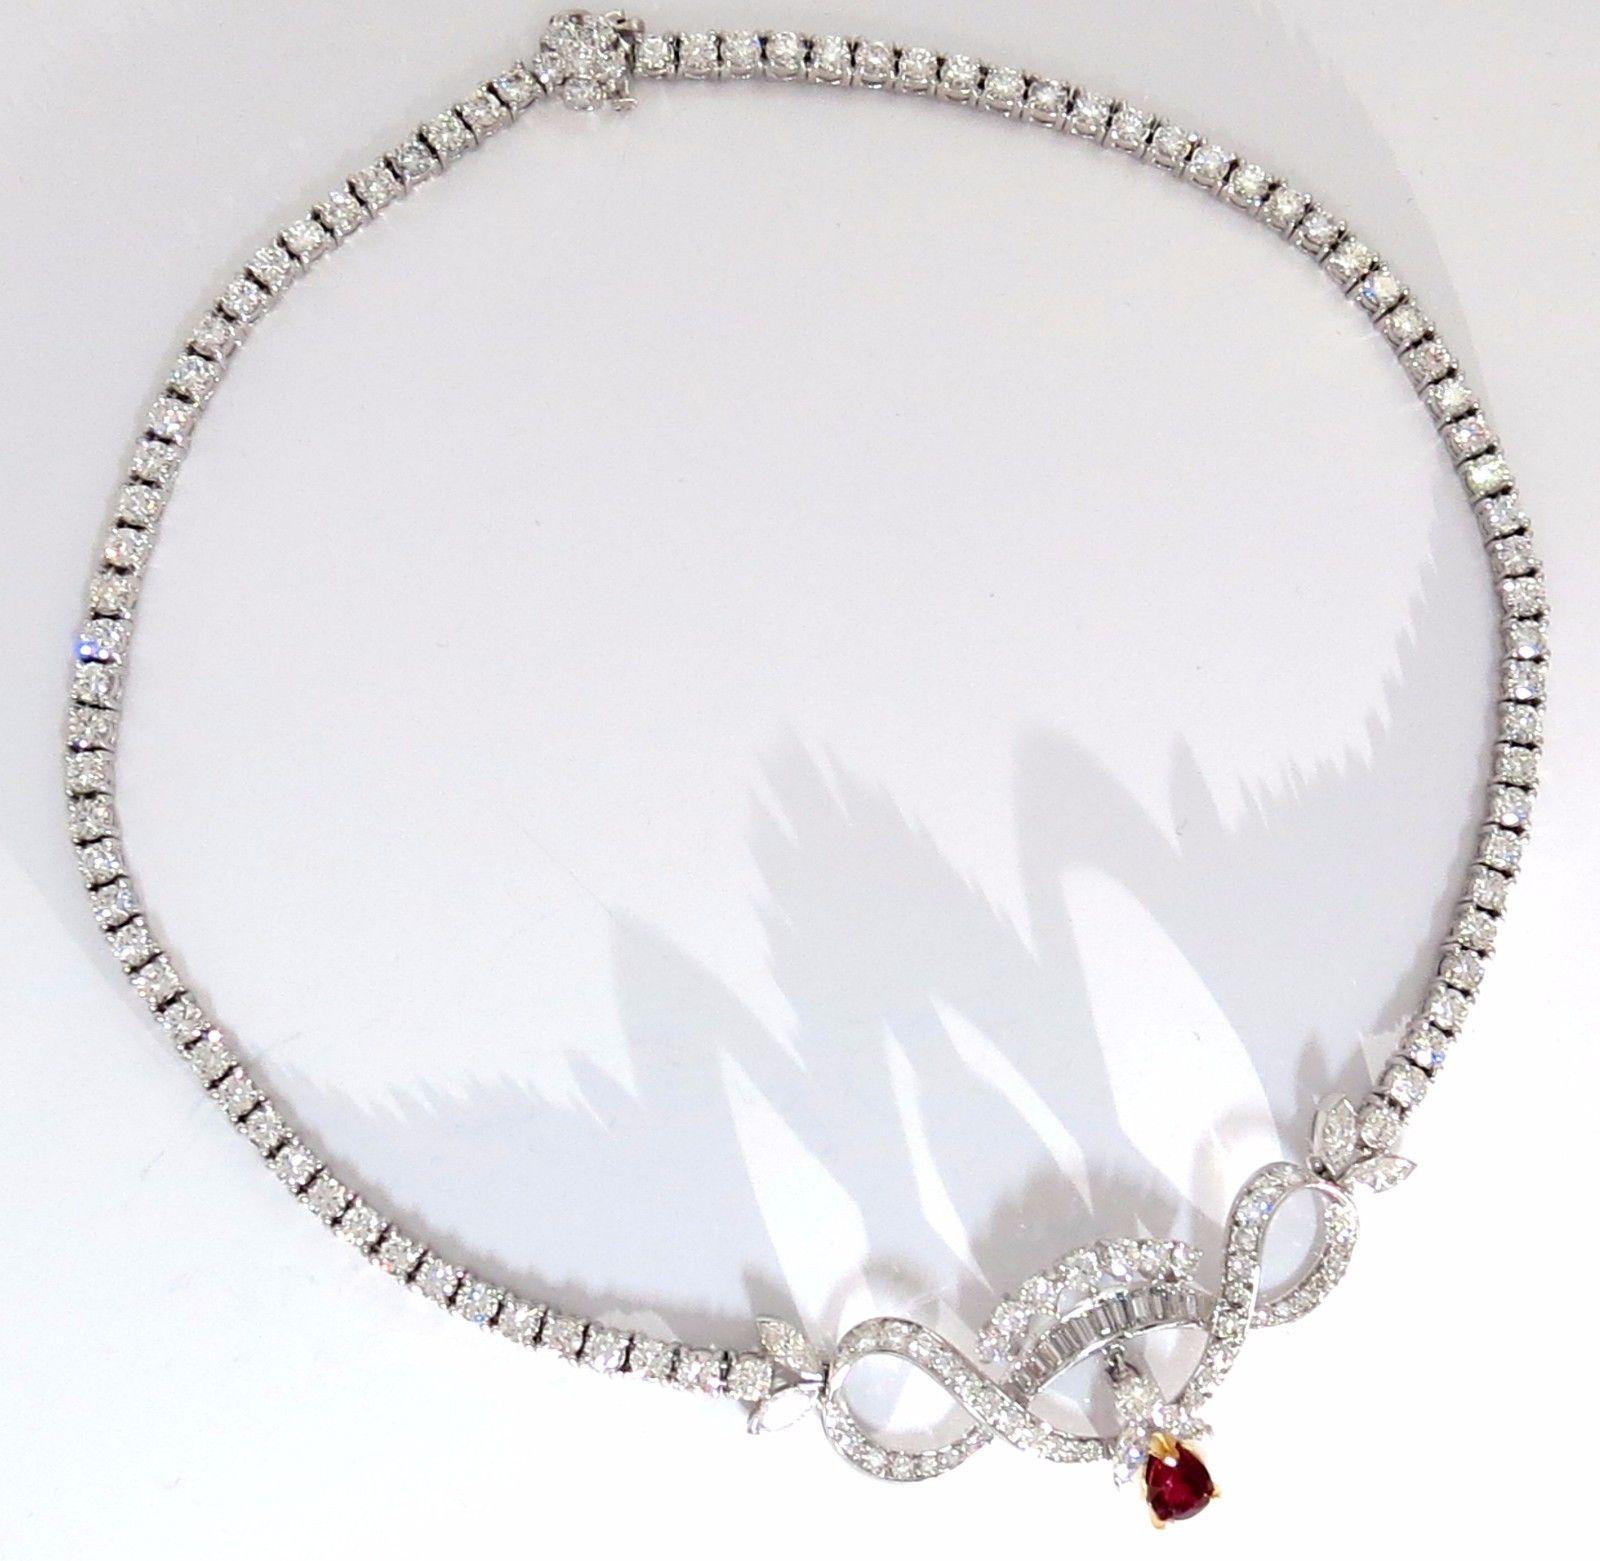 GIA 1.19ct. Natural Ruby & 20.00ct diamonds necklace.

The Vintage Elegance.

GIA #1152940016

Pear Shape, Full cut

clean clarity and transparent. 

6.75 X 5.18 X 4.05mm.

The classic Vivid Red.



20.00 Natural diamonds.

Baguettes, Marquise &